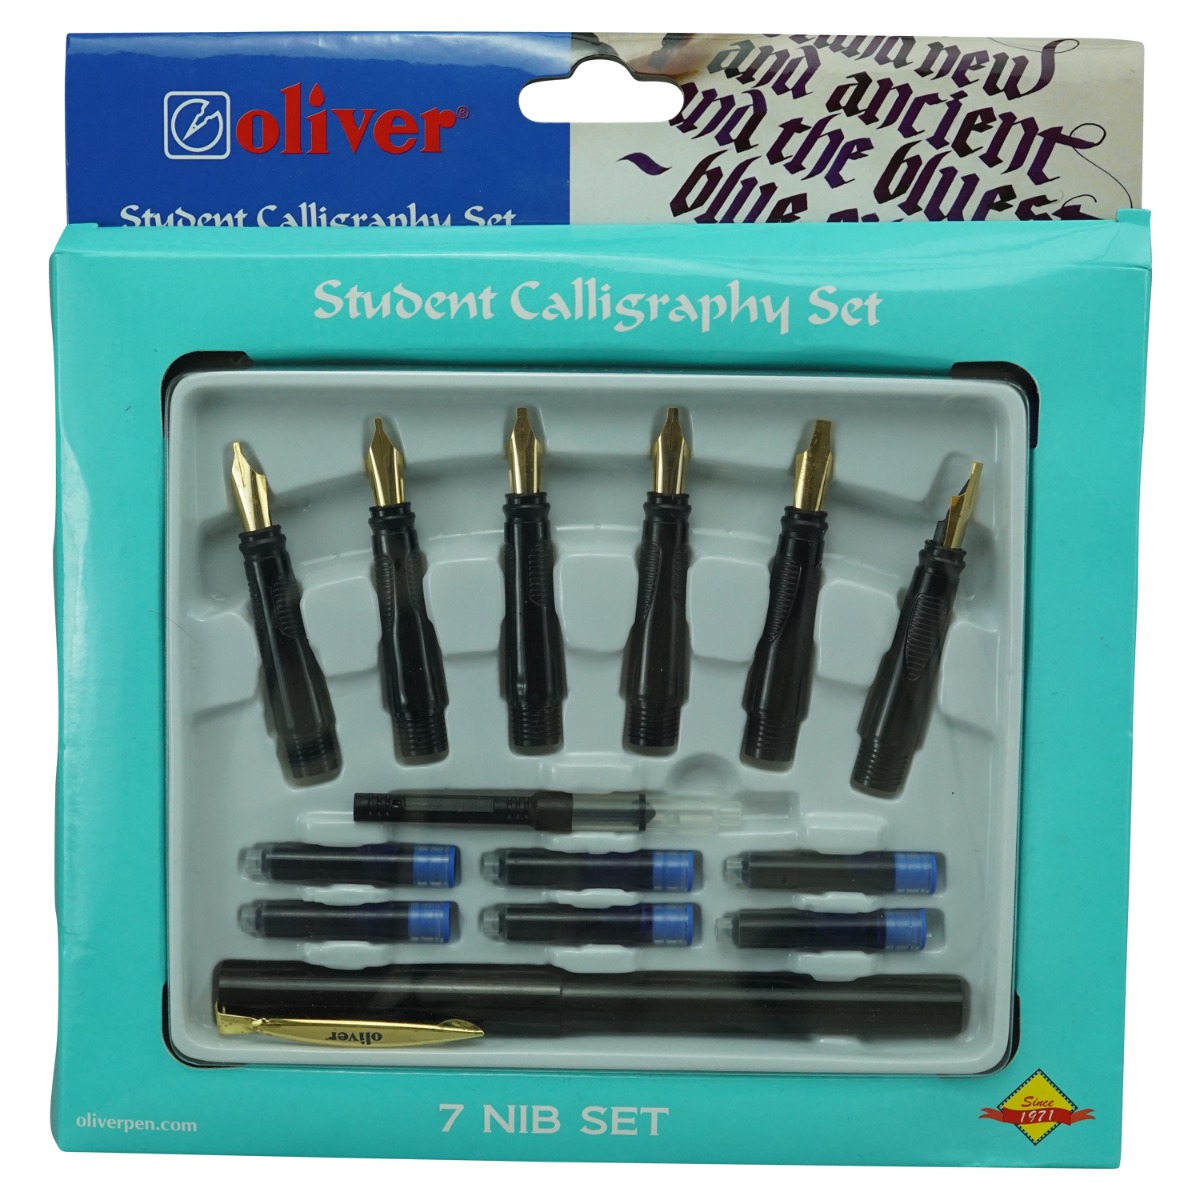 Oliver Student Calligrapher  Model:16125  Black   Color  Body With 7  Nib Set  Calligraphy Pen  and 6 Catridge With Convertor Set 